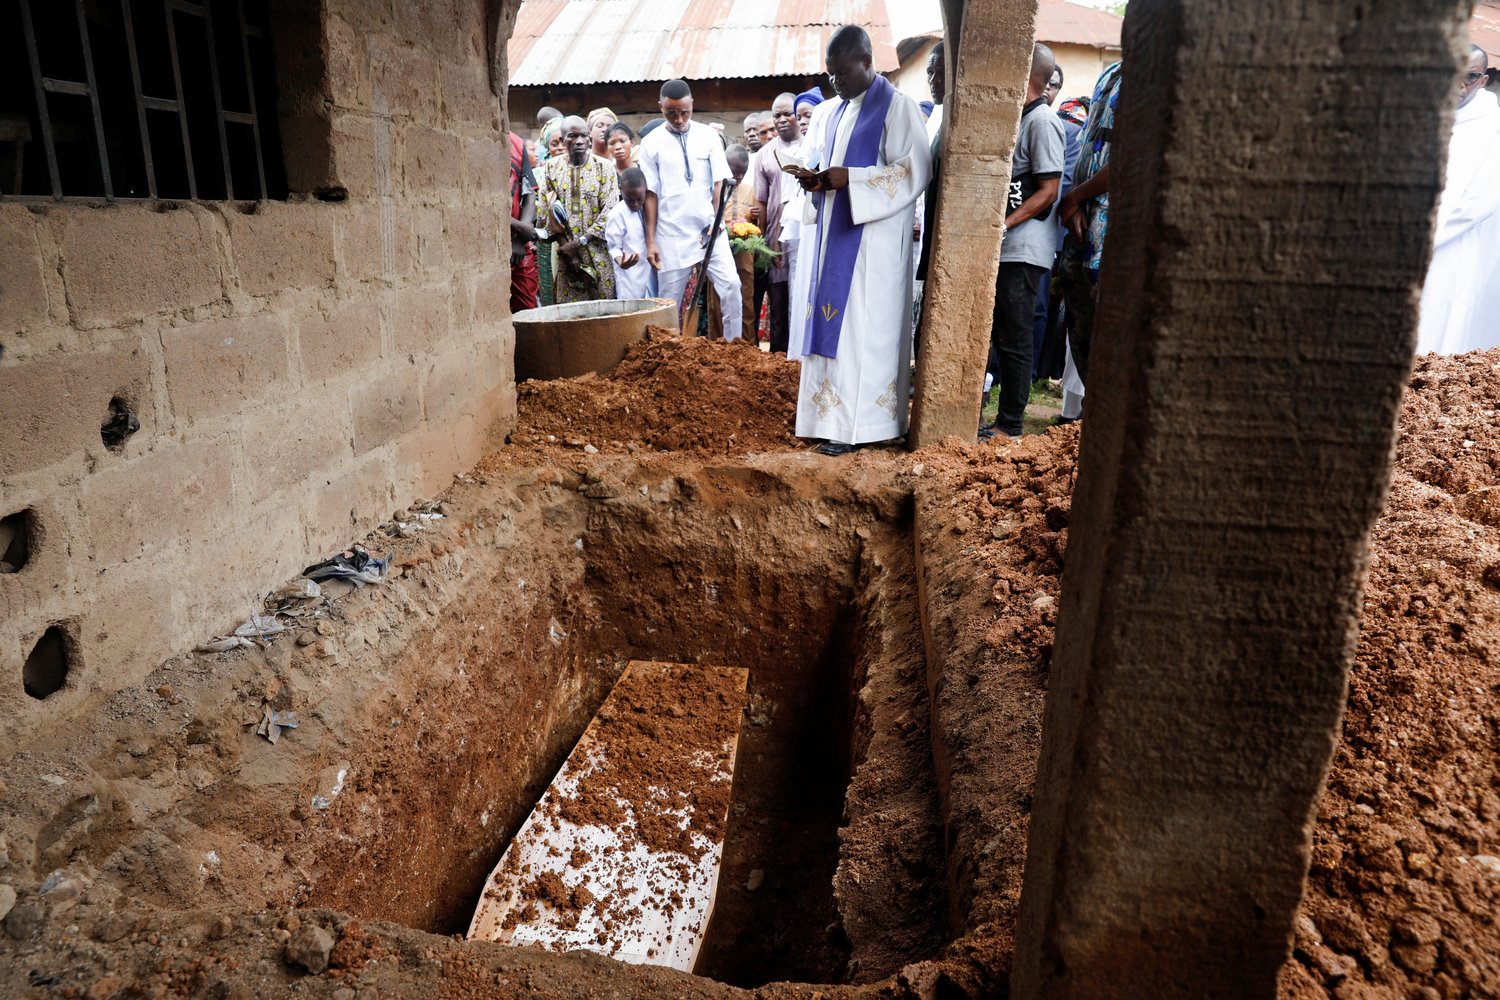 A priest prays over a casket during a burial outside St. Francis Xavier Church in Owo, Nigeria, June 17. The Funeral Mass was for at least 50 victims killed in a June 5 attack by gunmen during Mass at the church.